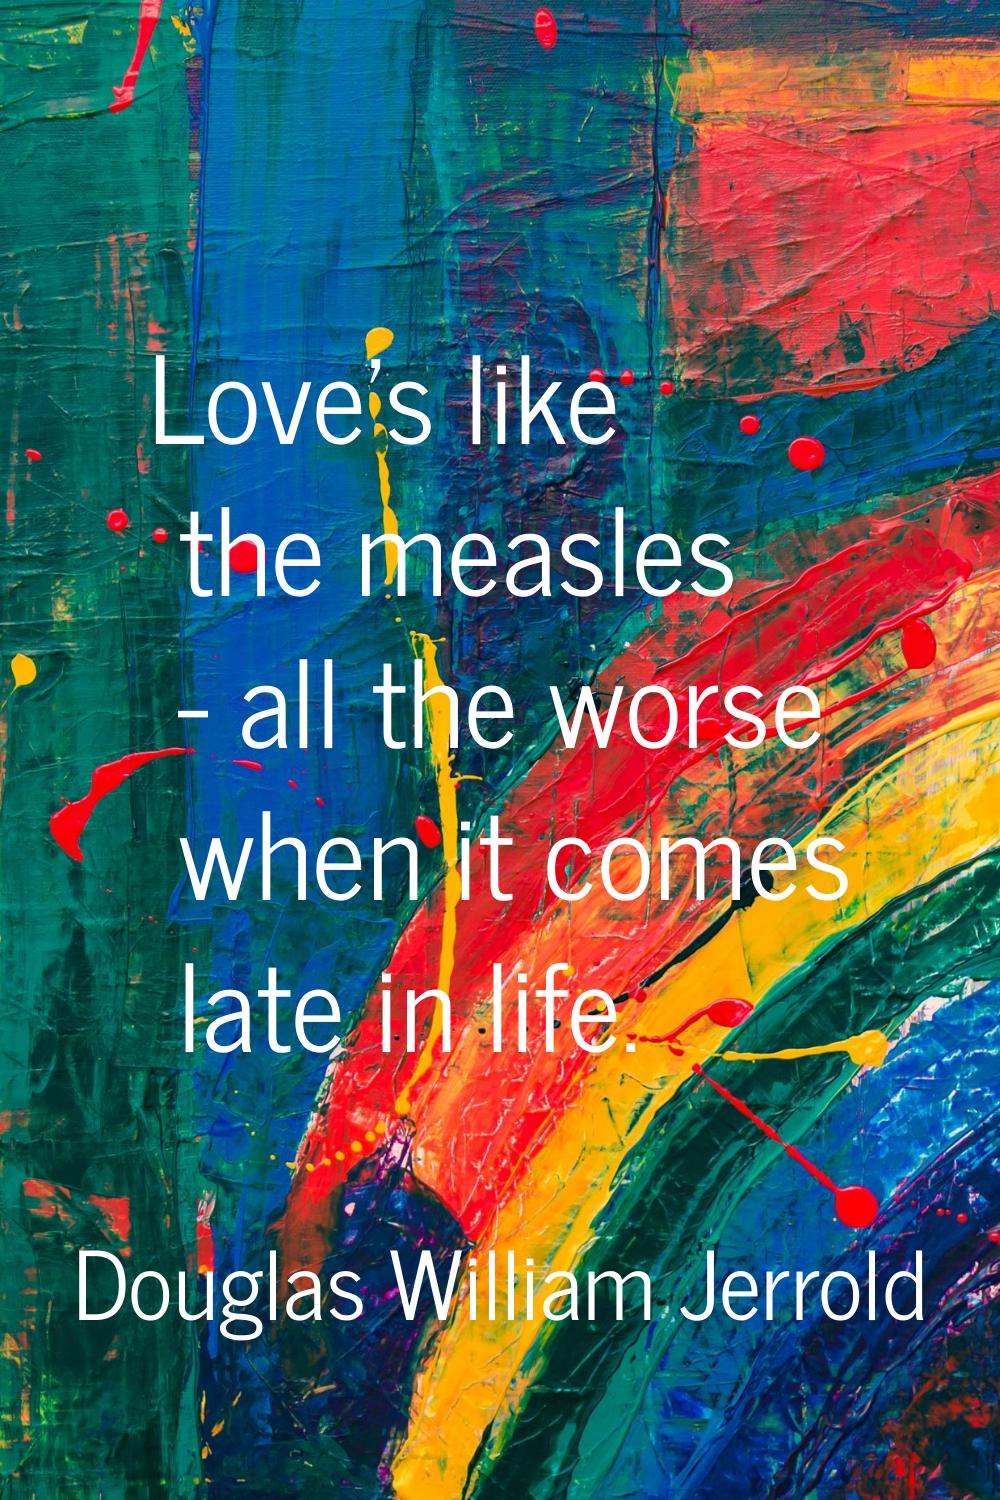 Love's like the measles - all the worse when it comes late in life.